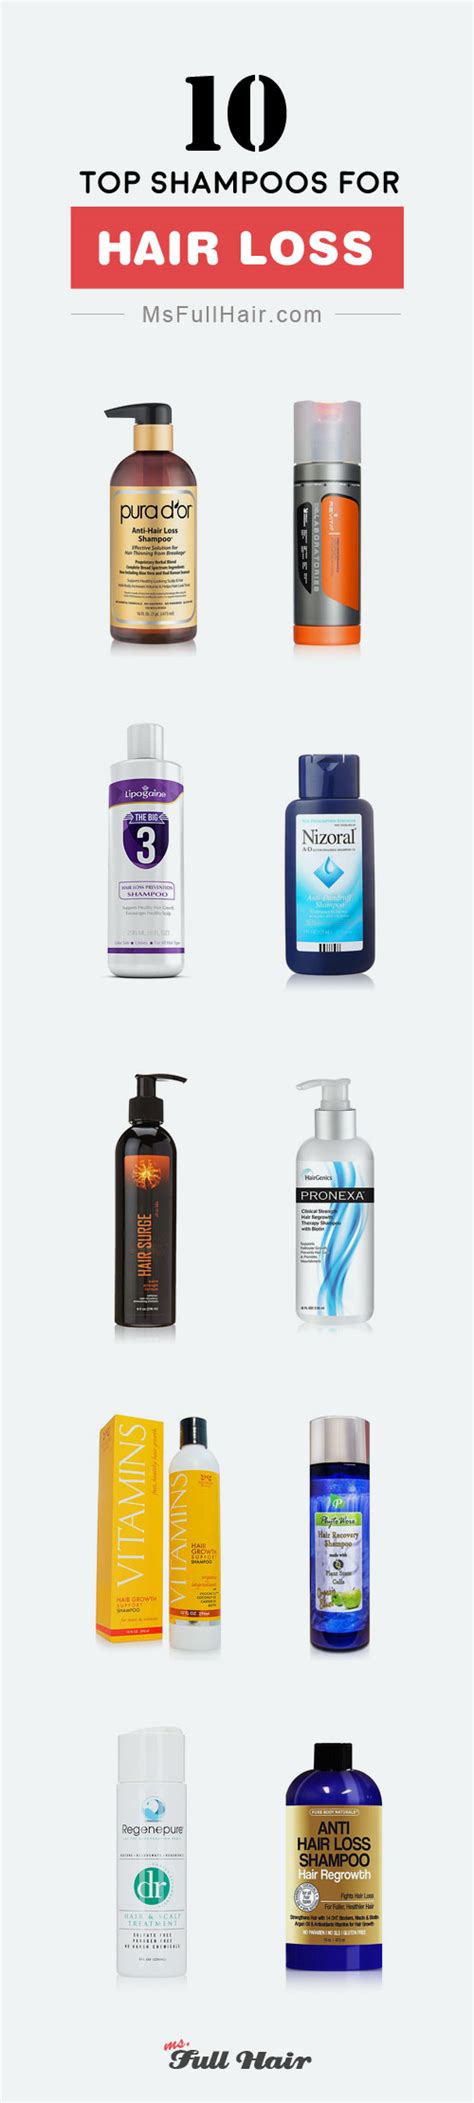 More importantly, adenovital's key ingredient adenosine has strong scientific backing when it comes to benefiting hair growth. 10 Best Hair Loss Shampoos for Thinning Hair (Plus, 2 ...